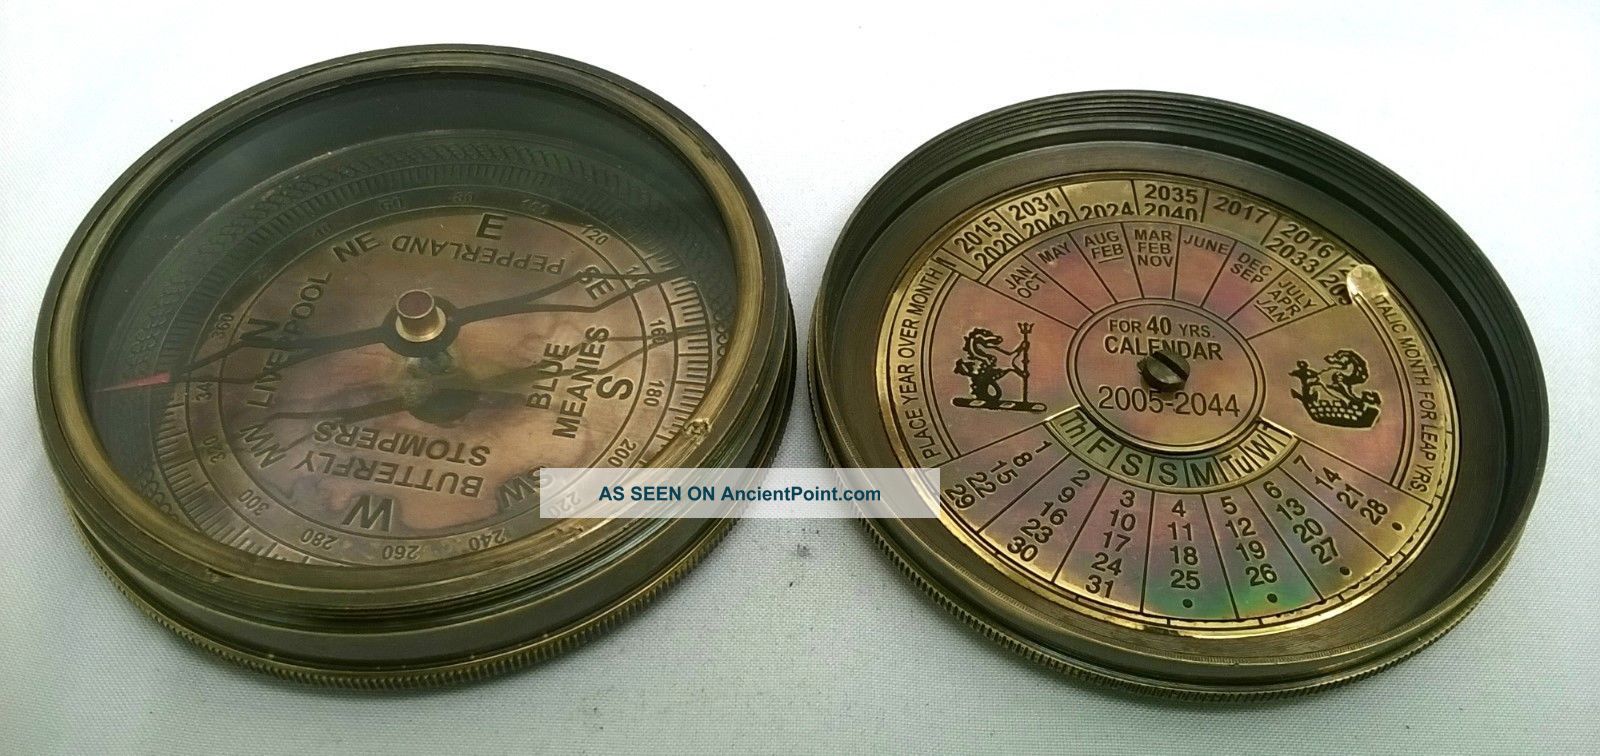 Antique Style Solid Brass Kelvin And Hughes London Compass With 40 Yrs Calendar Compasses photo